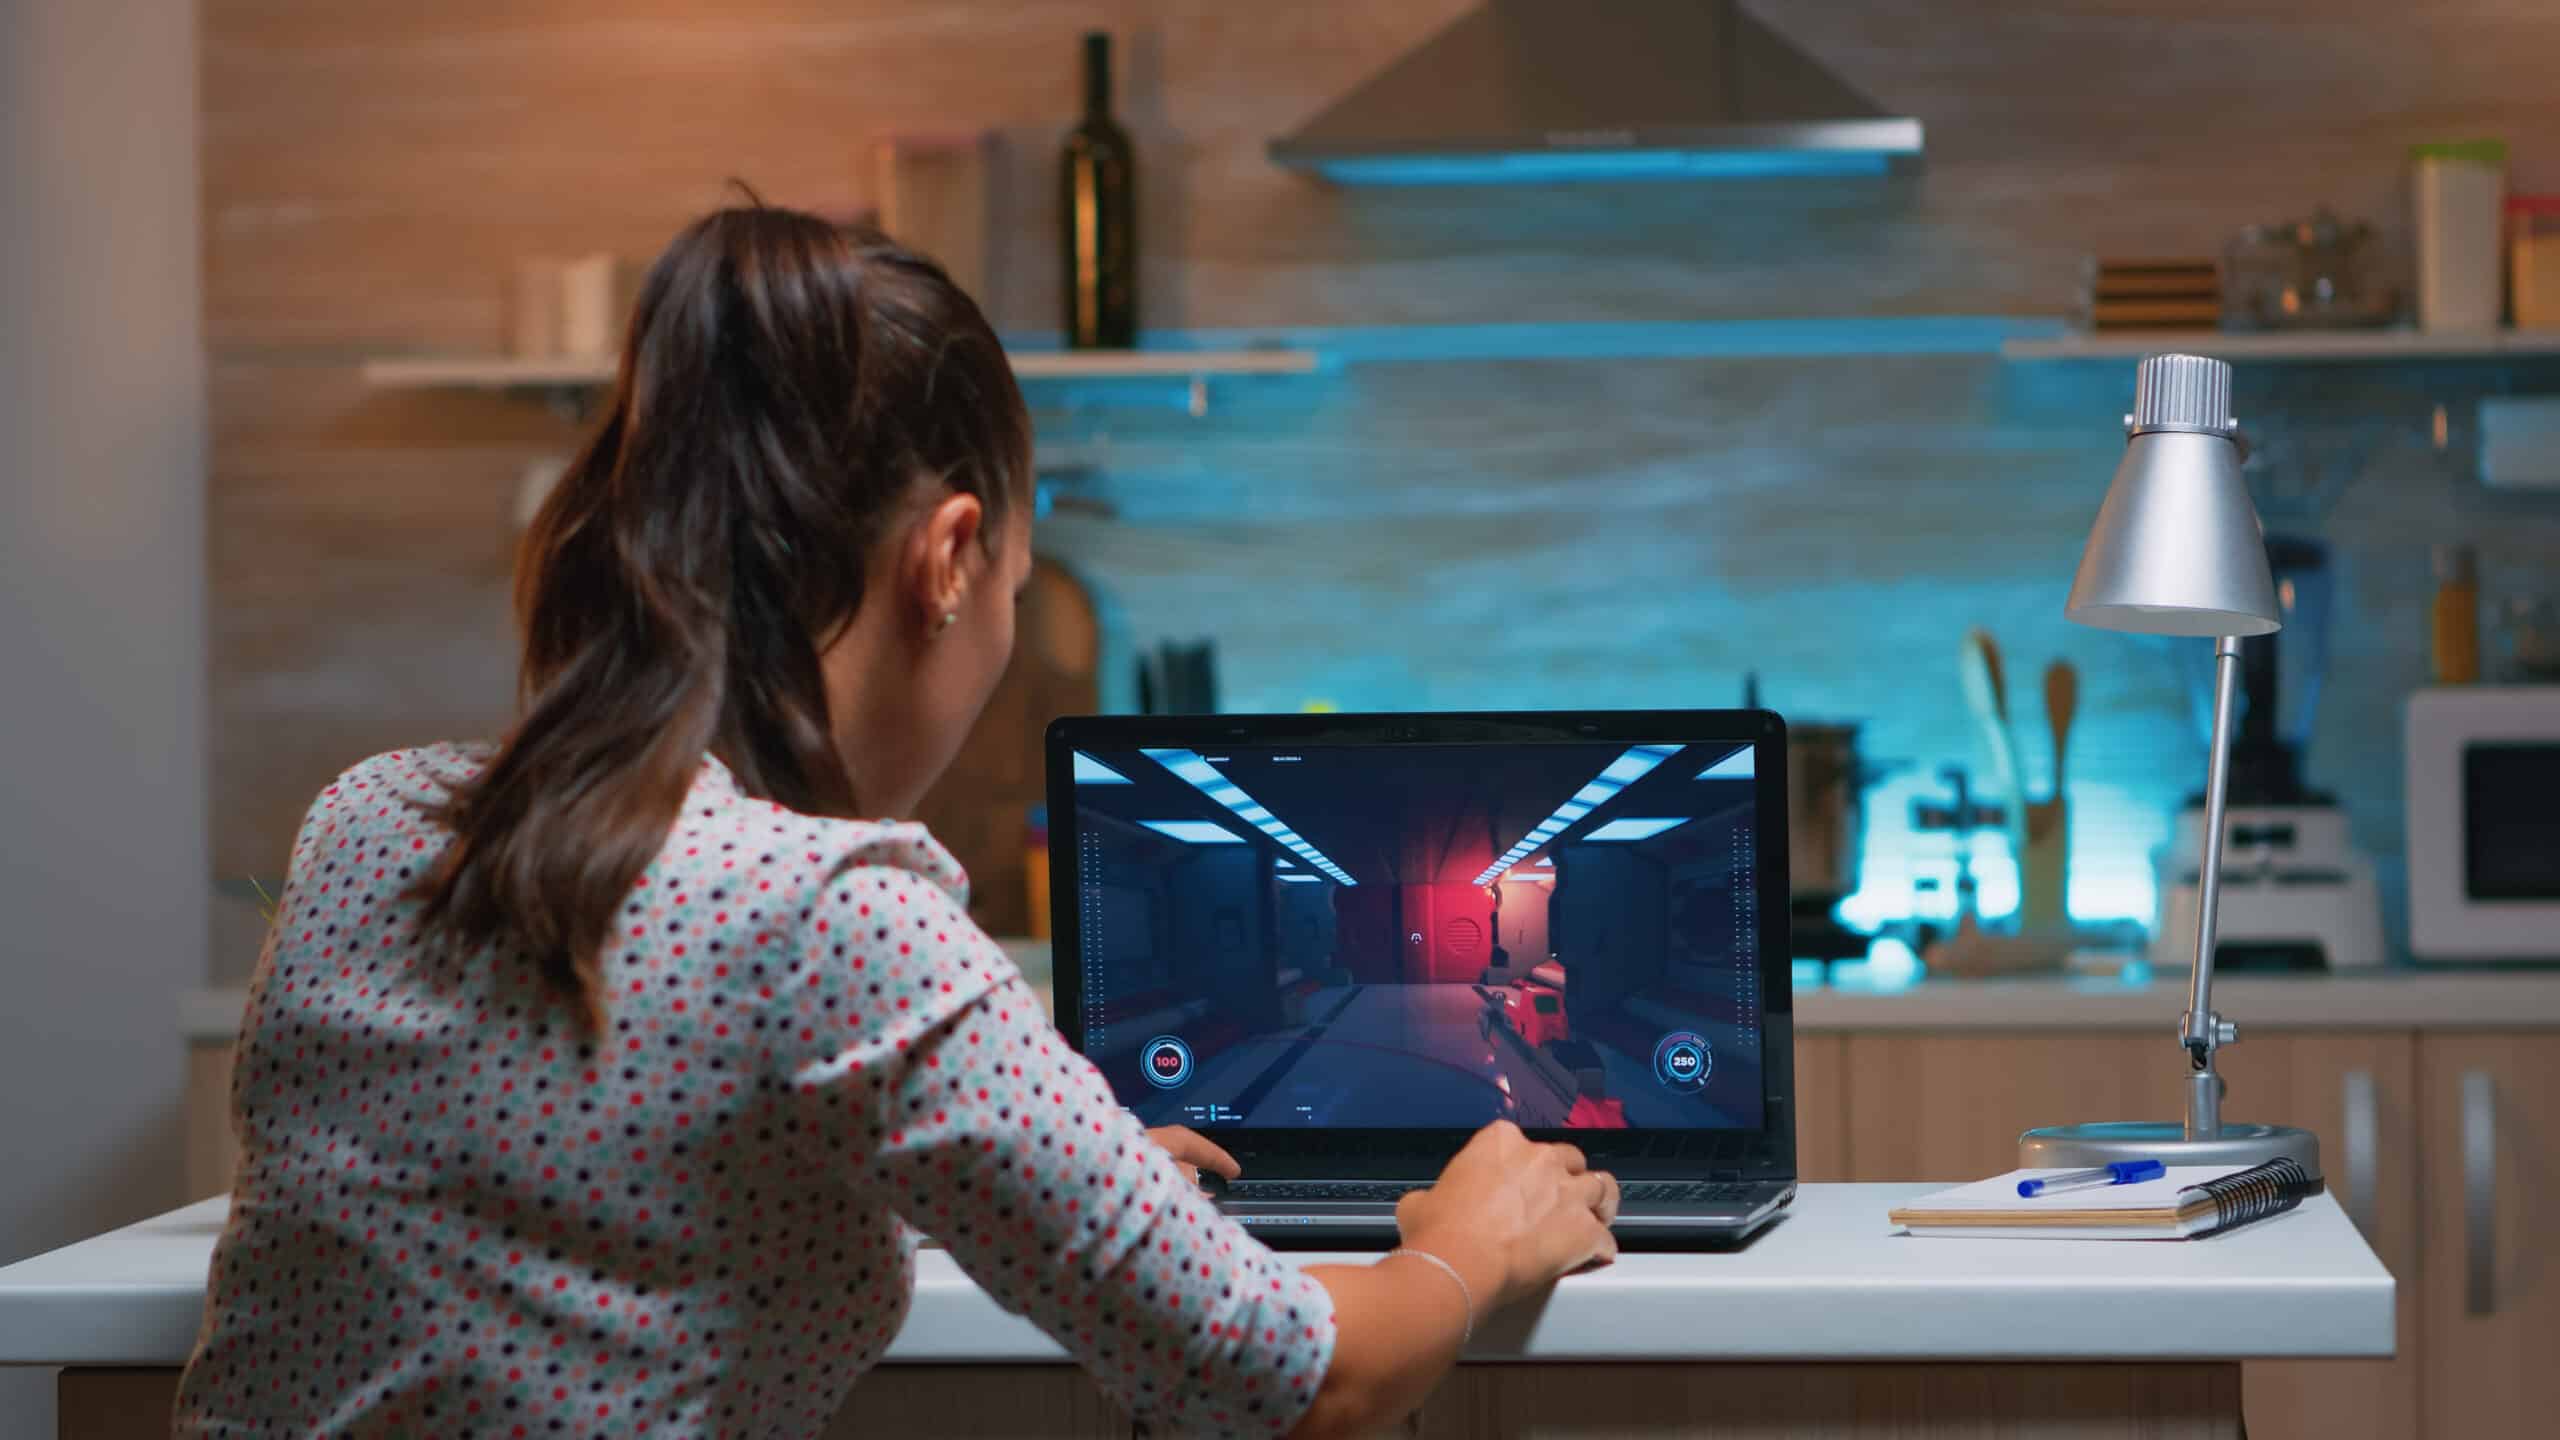 Alienware vs. ASUS – Which Is Better?